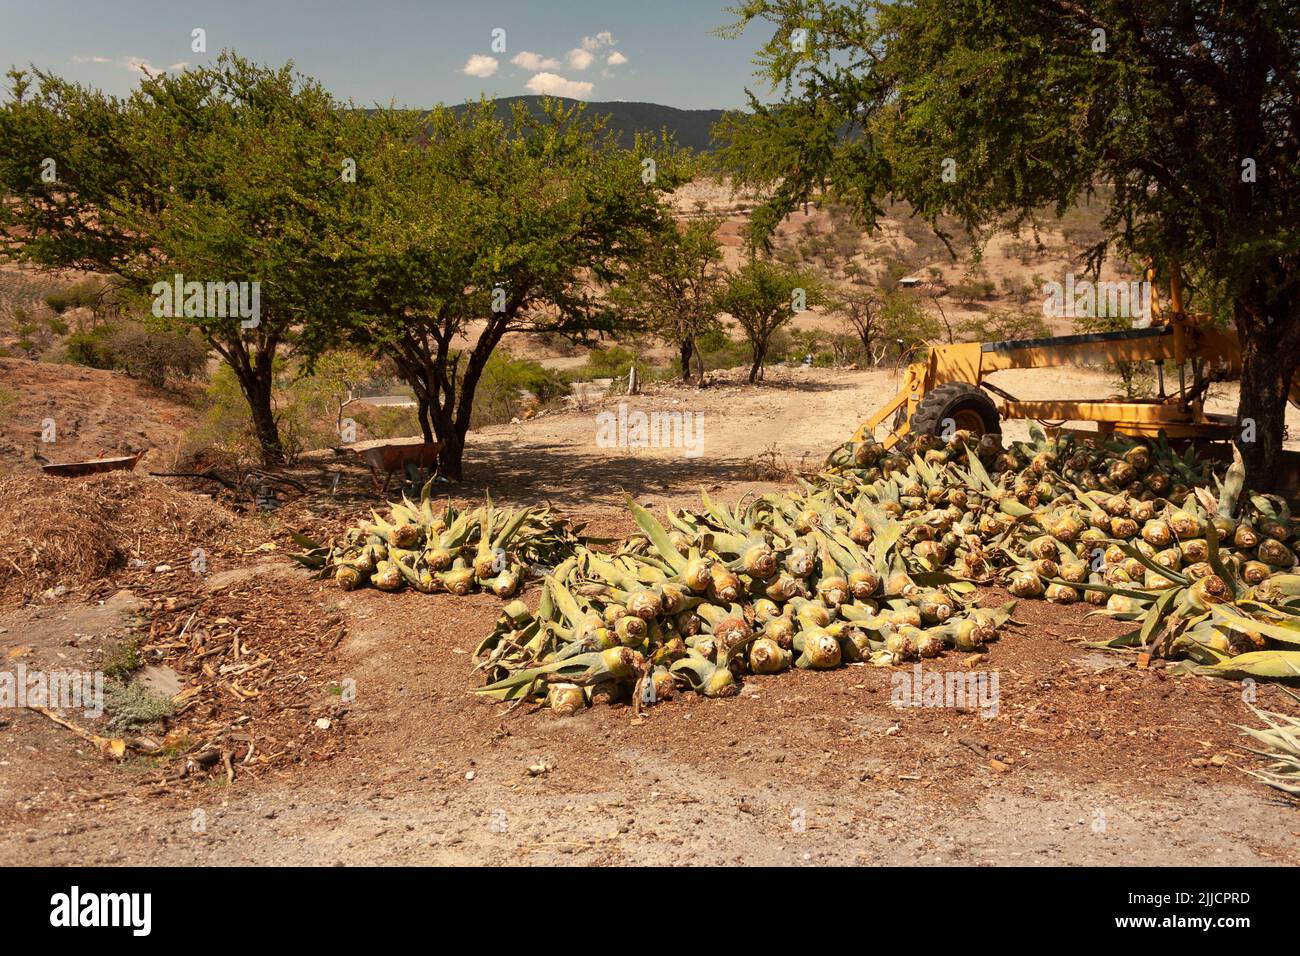 Agave plant harvest in rural scene in Mexico between mountains and land and work tools tractor and wheelbarrow Stock Photo